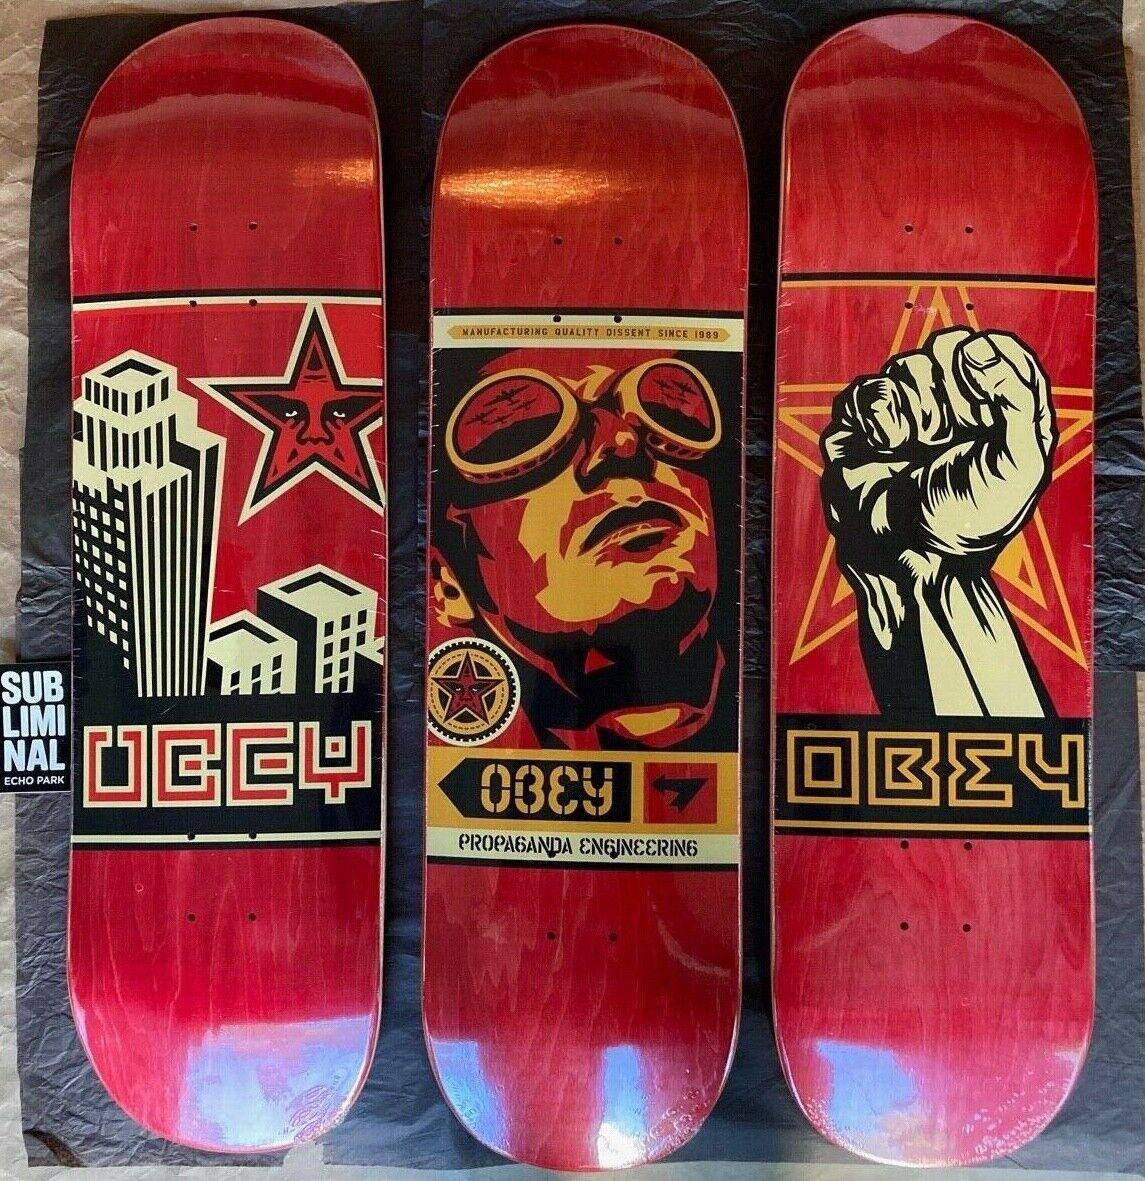 Shepard Fairey Obey Giant 30th Anniversary Skateboard Set of 3 Limited to 300